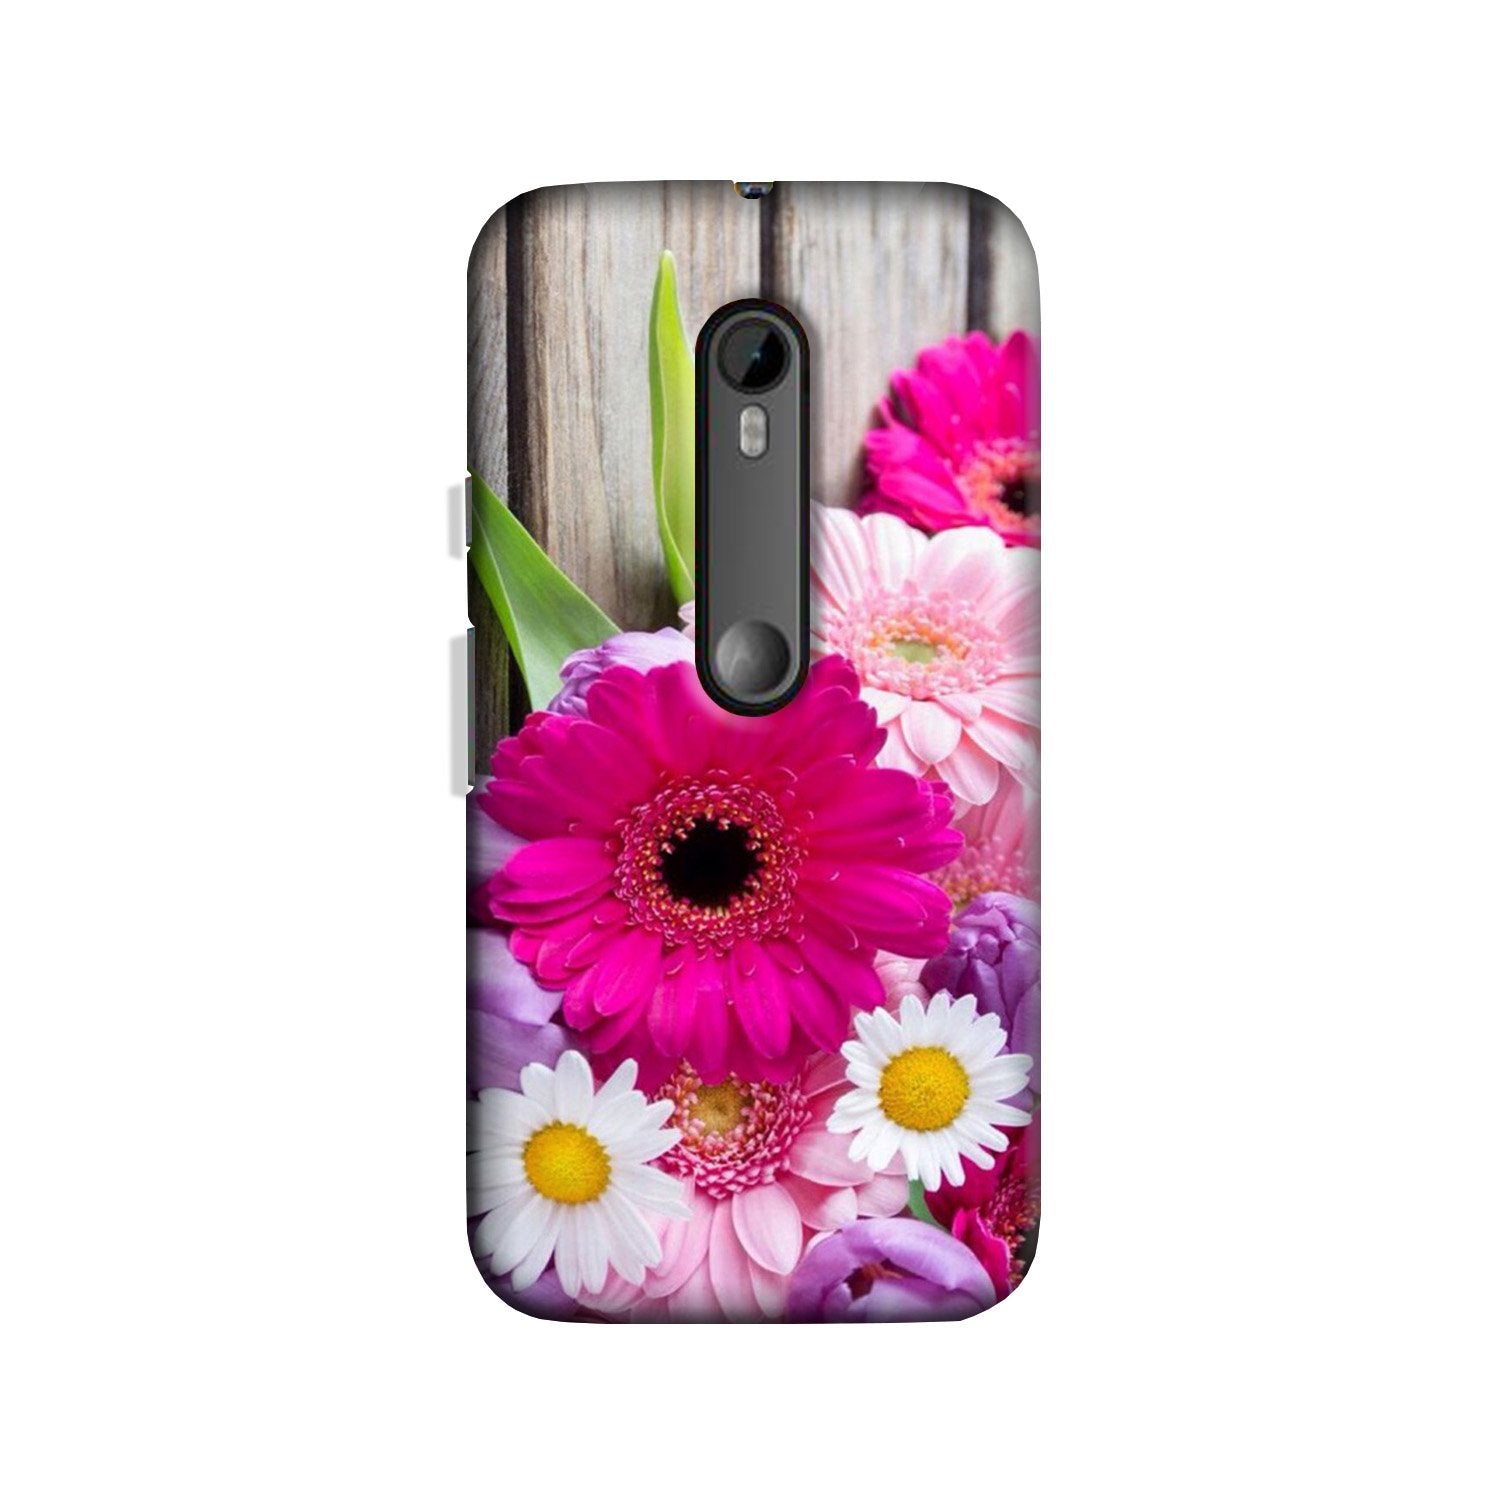 Coloful Daisy2 Case for Moto X Force